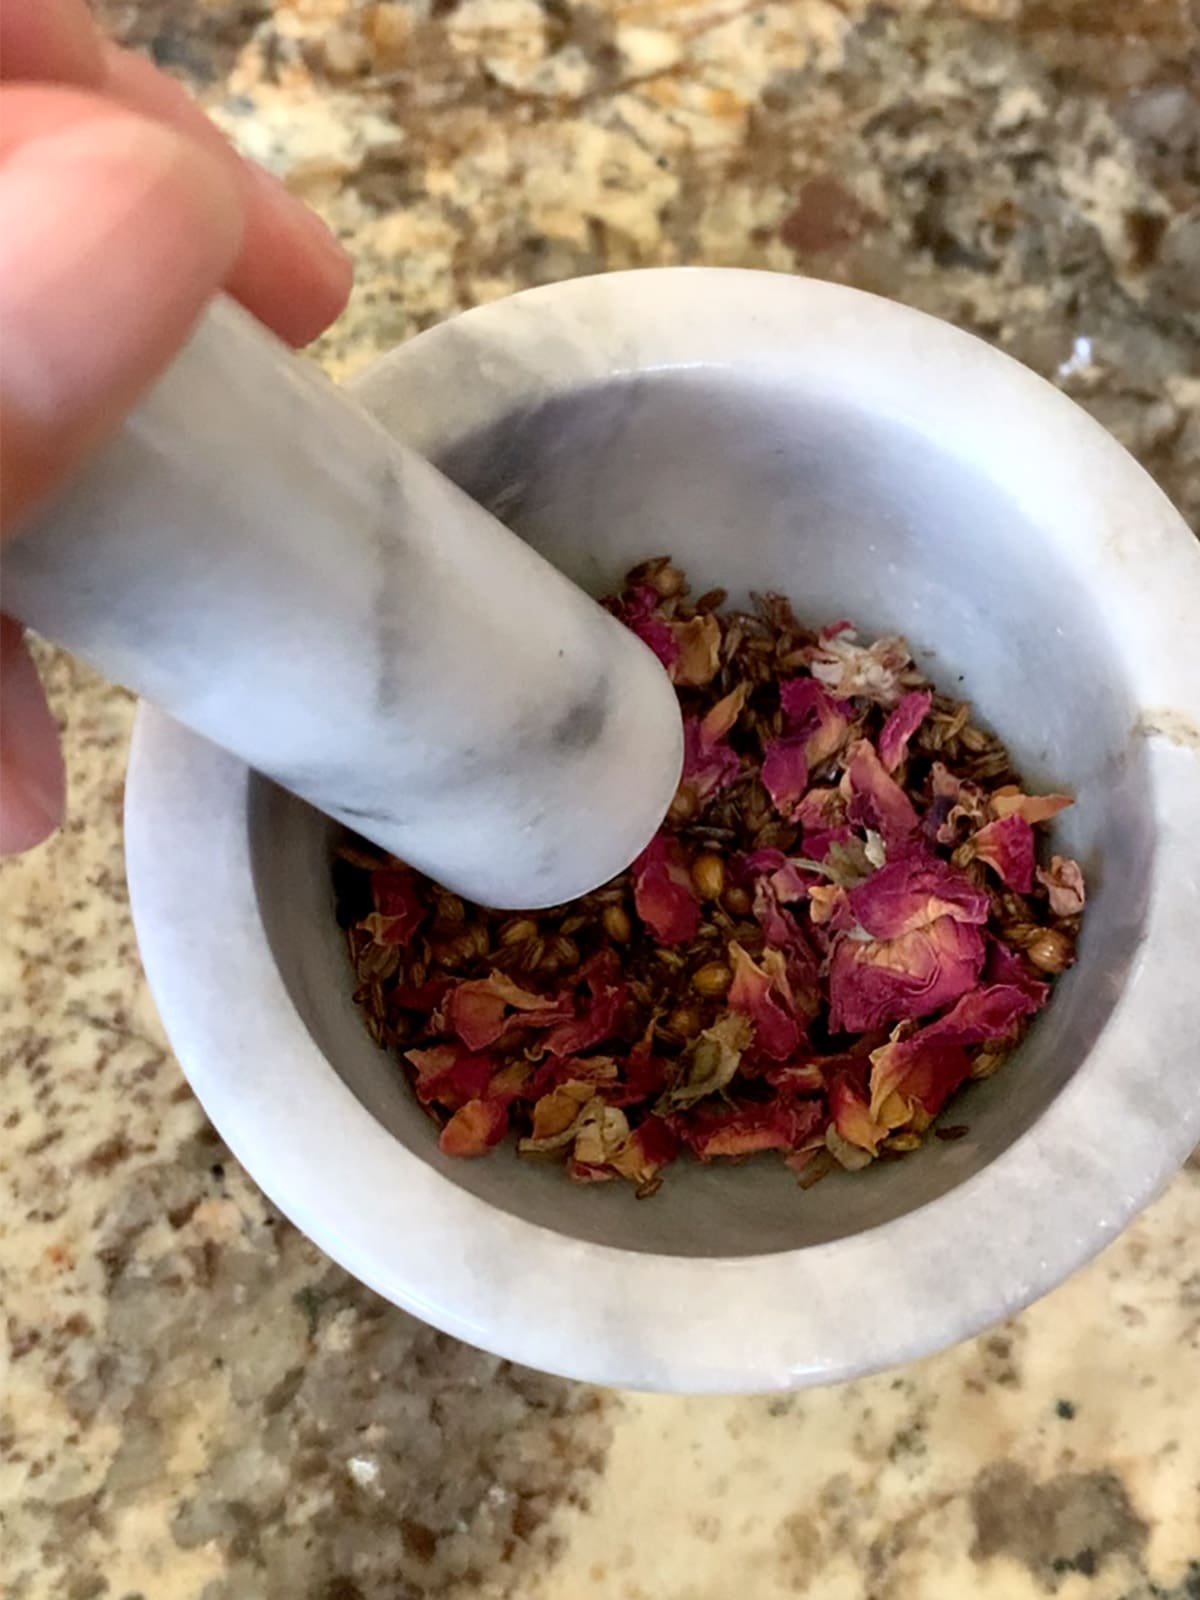 Spices and rose petals in mortar and pestle.